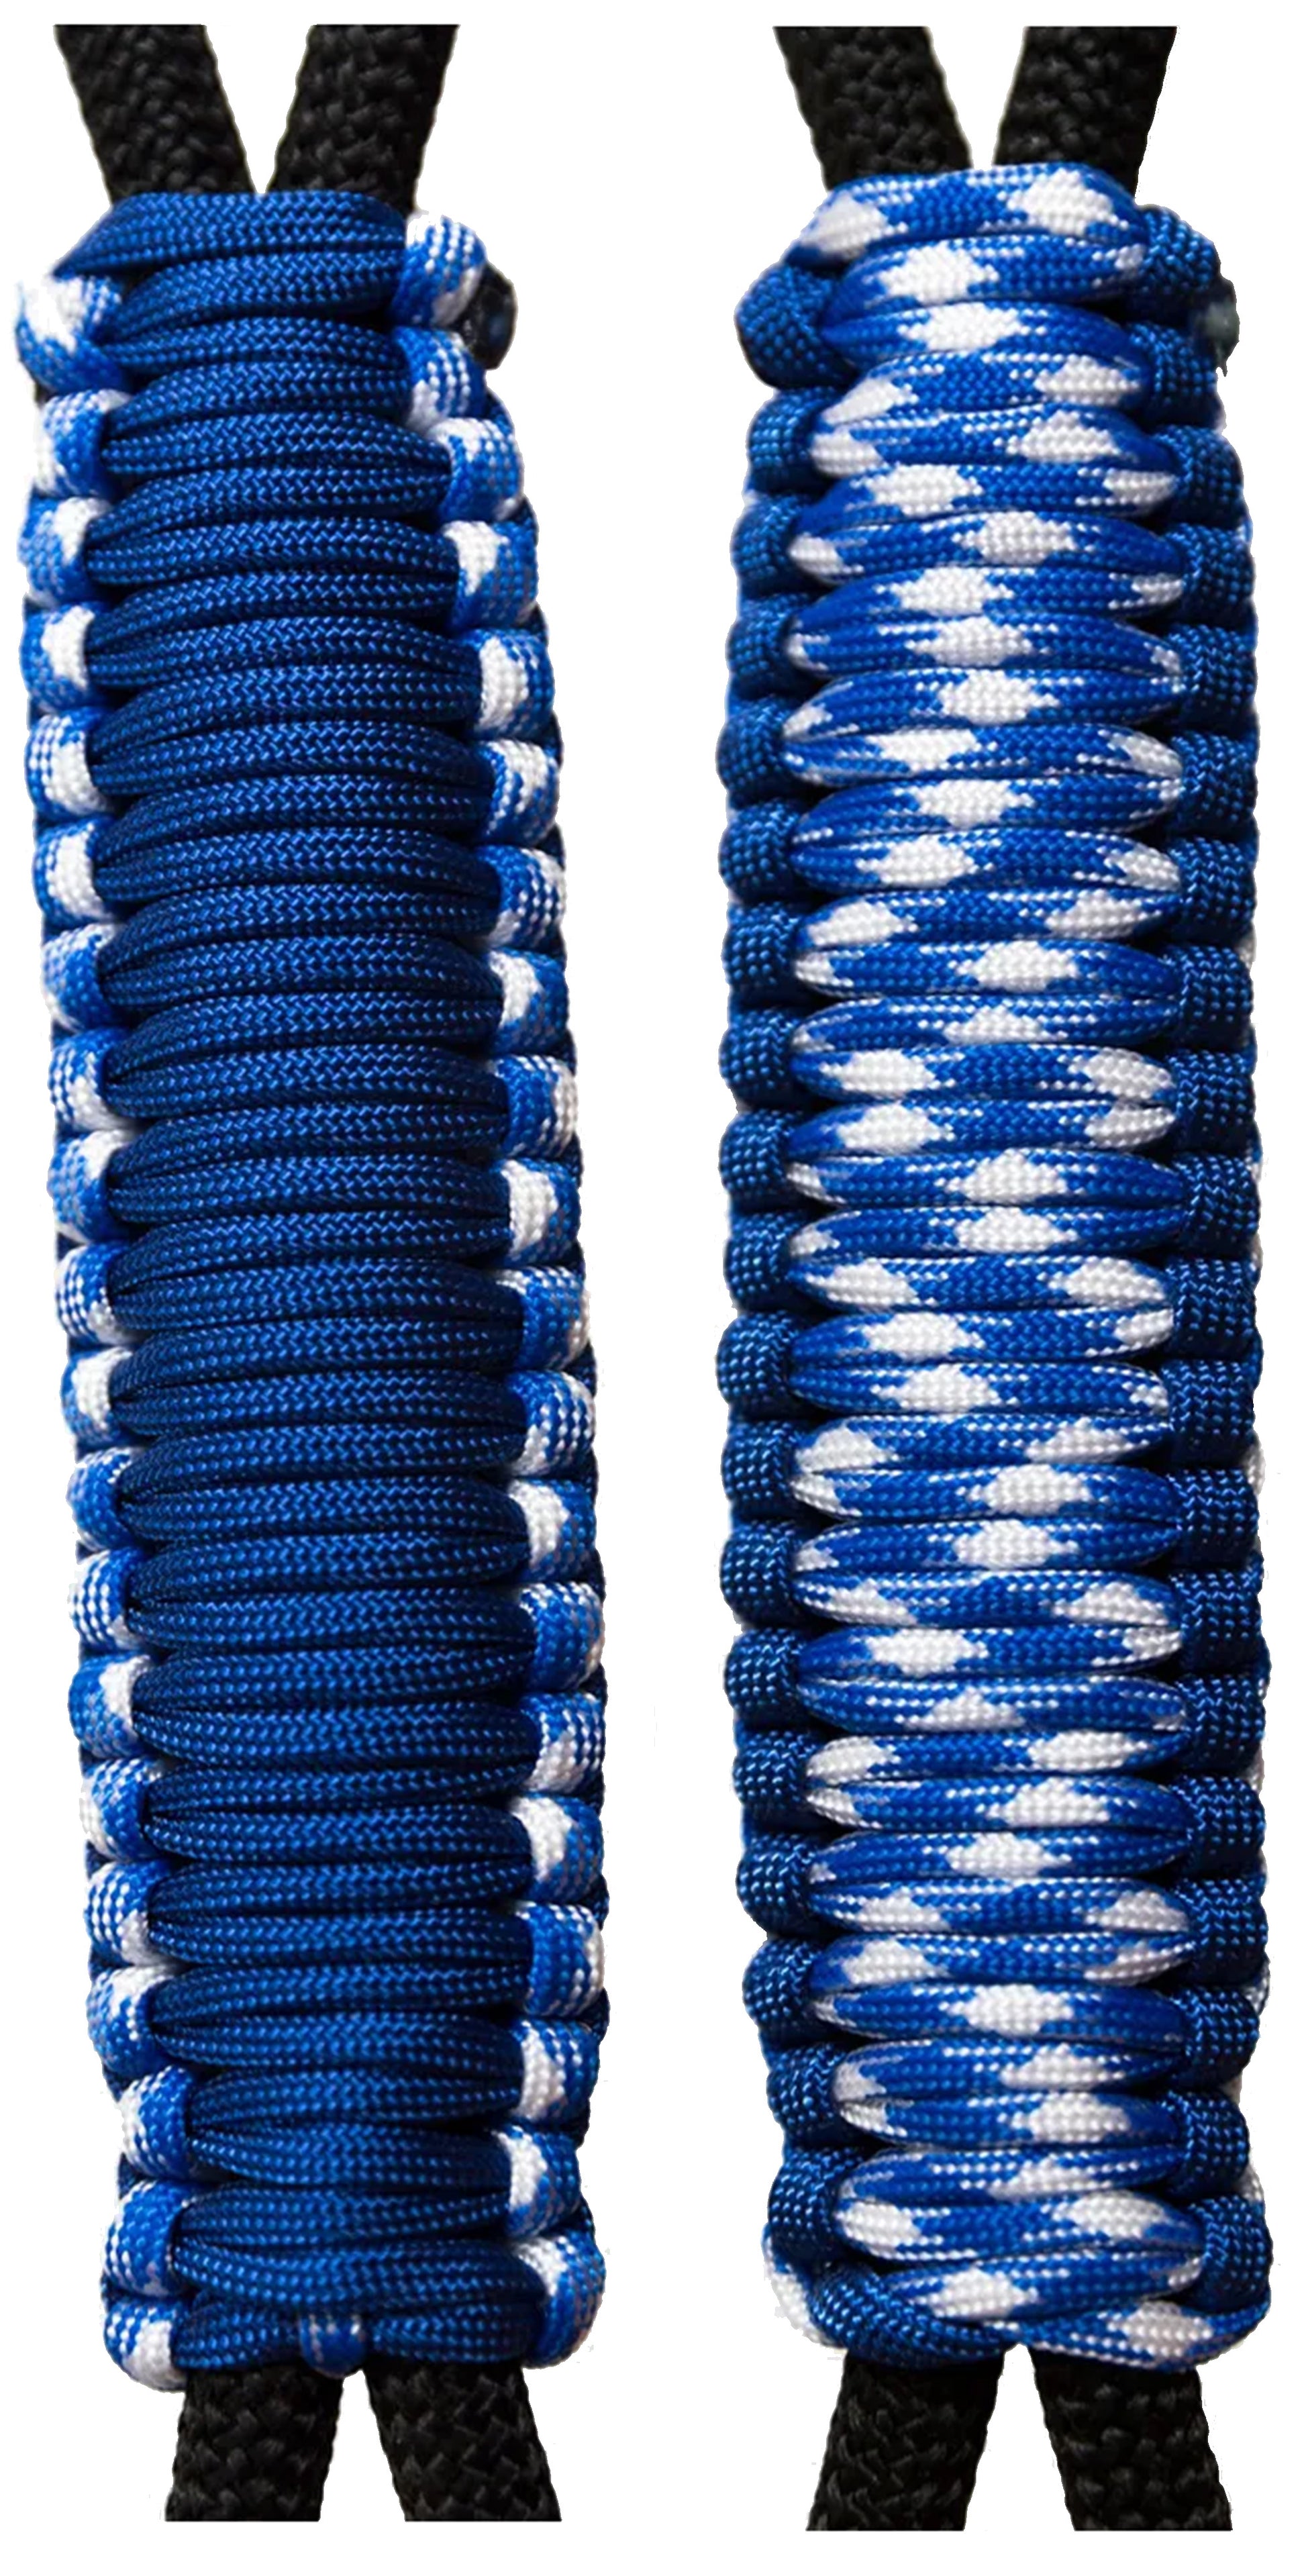 Royal Blue & Good Guy -C012C058 - Paracord Handmade Handles for Stainless Steel Tumblers - Made in USA!